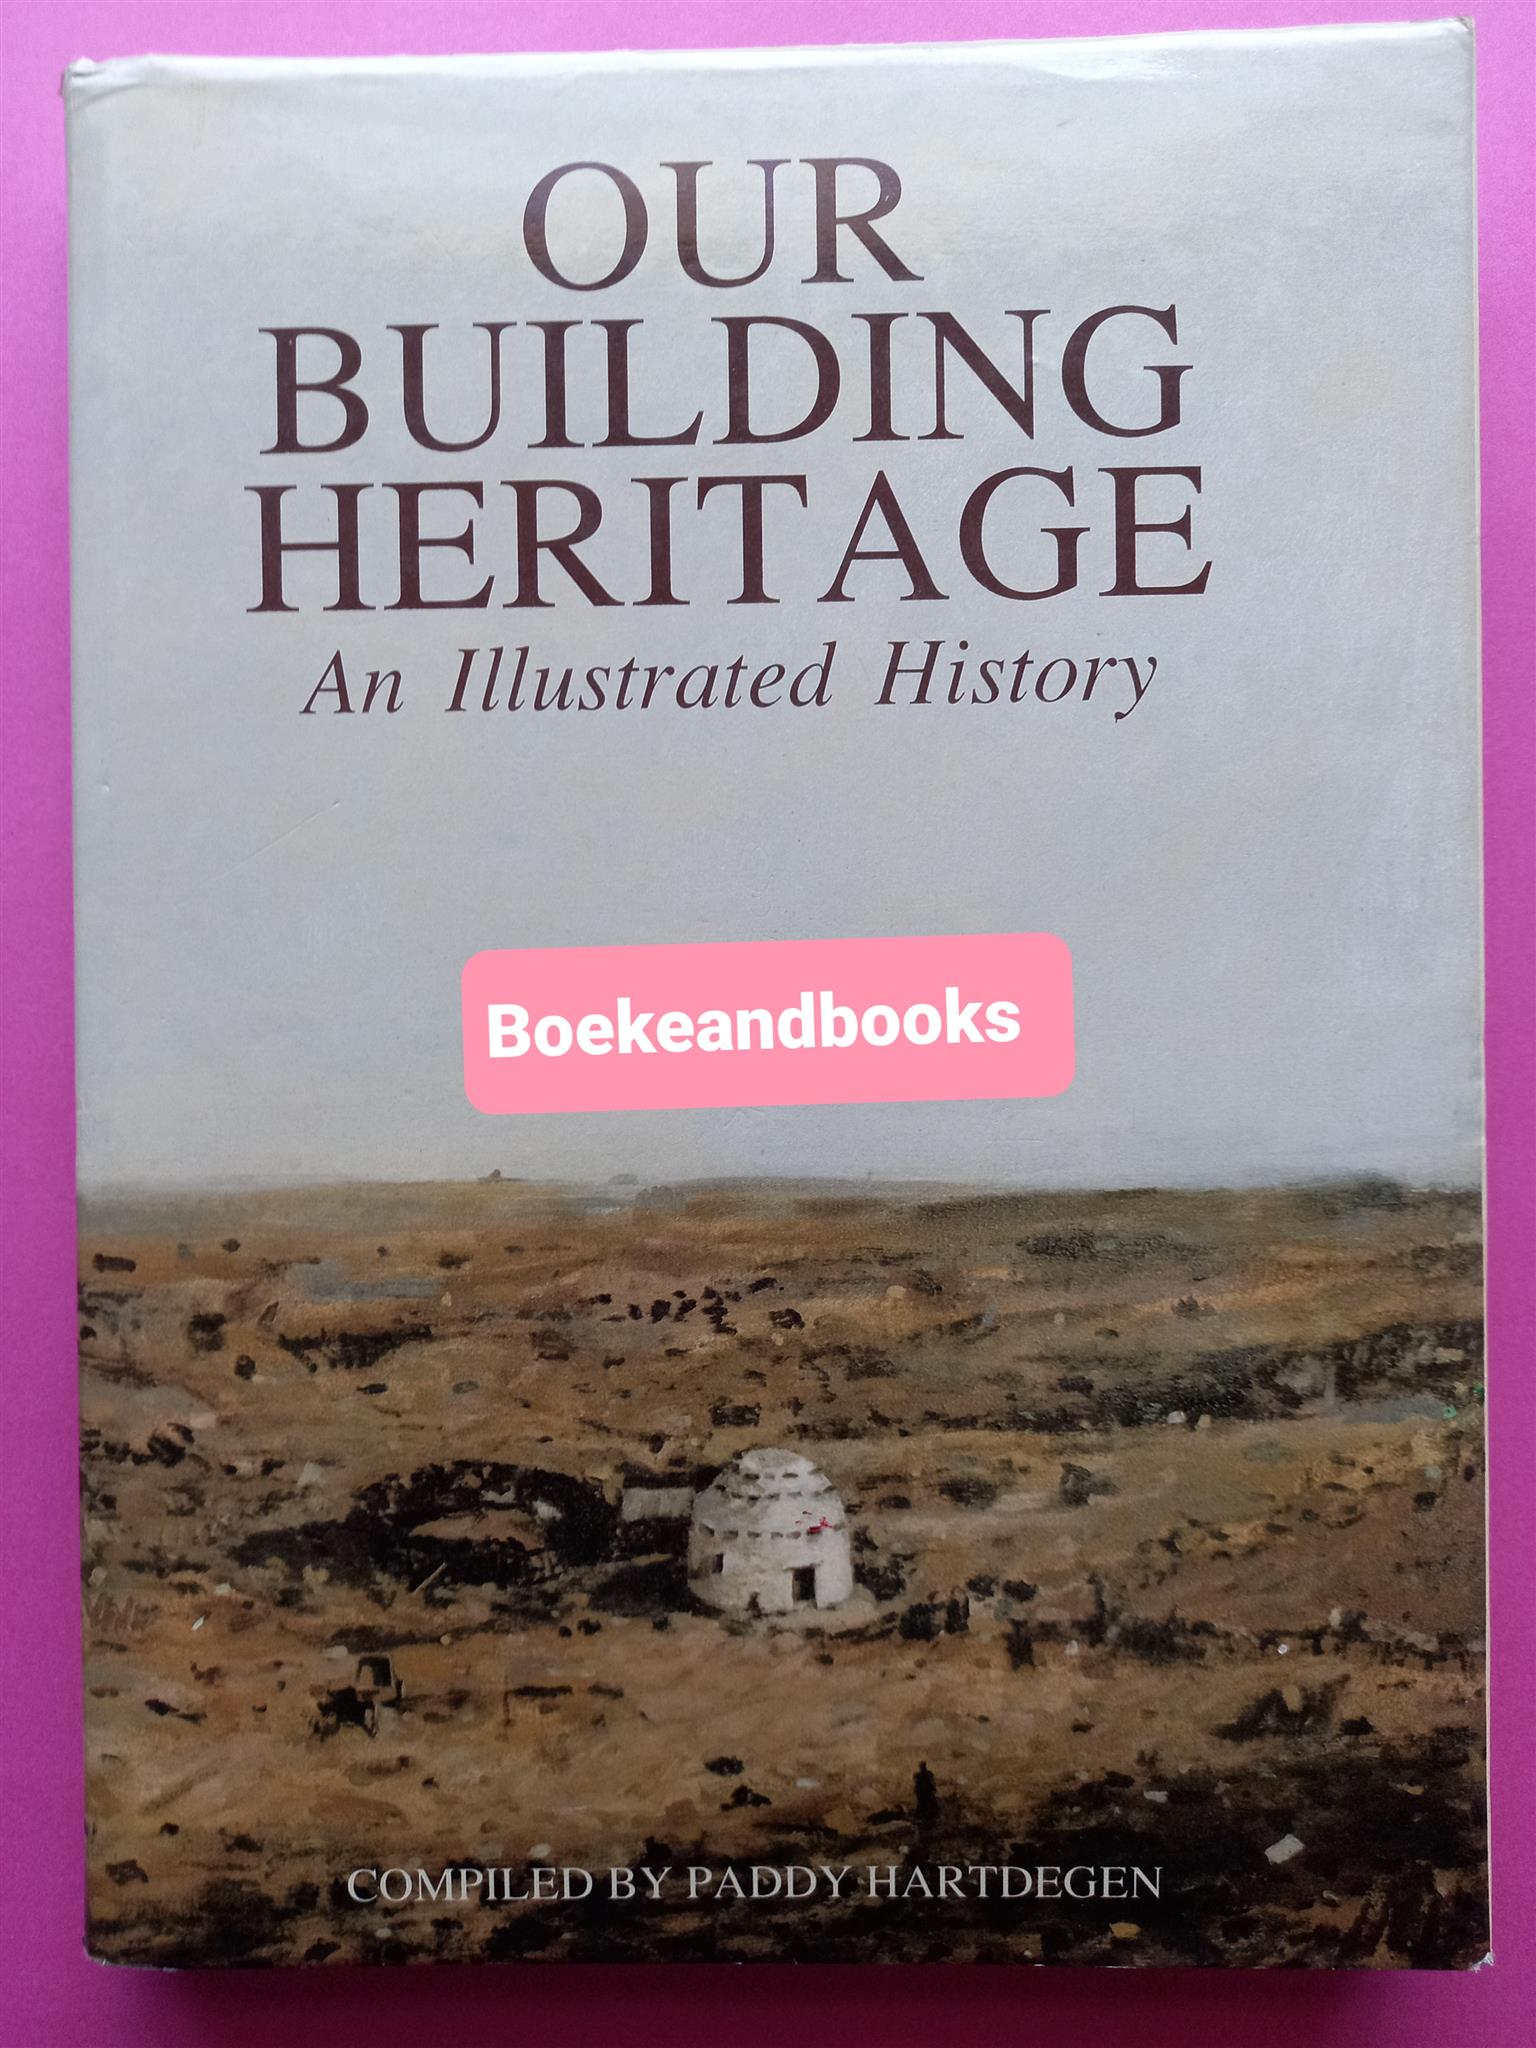 Our Building Heritage - An Illustrated History - Paddy Hartdegen.